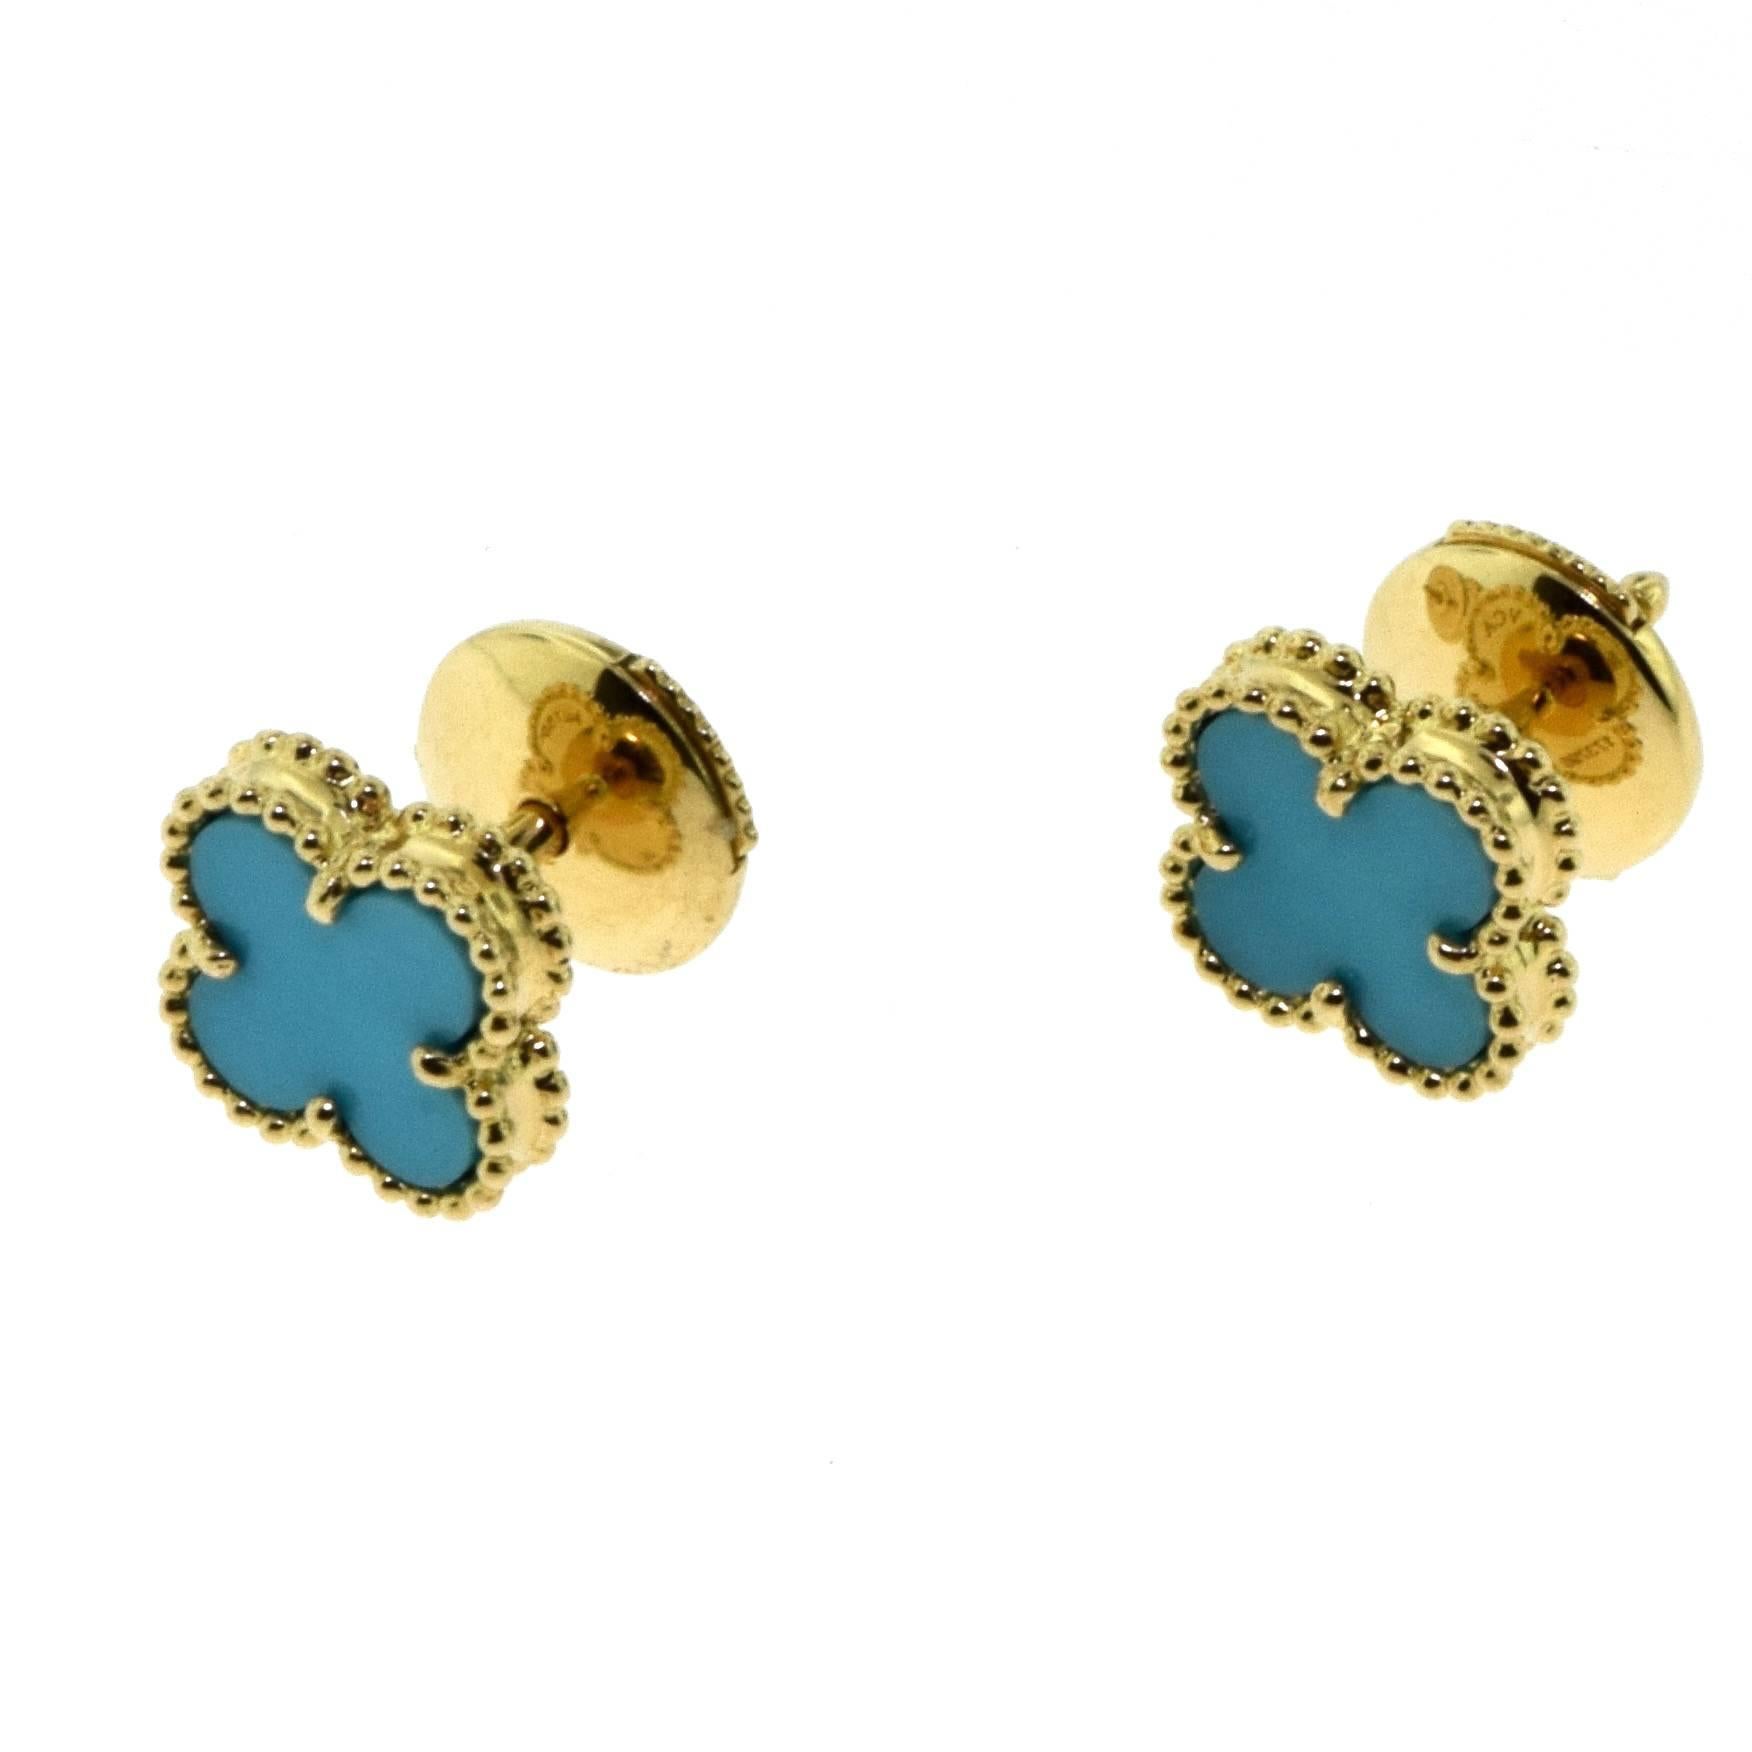 Designer: Van Cleef & Arpels

Collection: Sweet Alhambra

Metal: Yellow Gold

Metal Purity: 18k

STONE: 2 Turquoise Stones

Total Item Weight (g): 2.4

Motif Dimensions: 7.85 x 8.94 mm

Motif Thickness: 2.84

Hallmark: VCA 750 Serial No. (BLOCKED